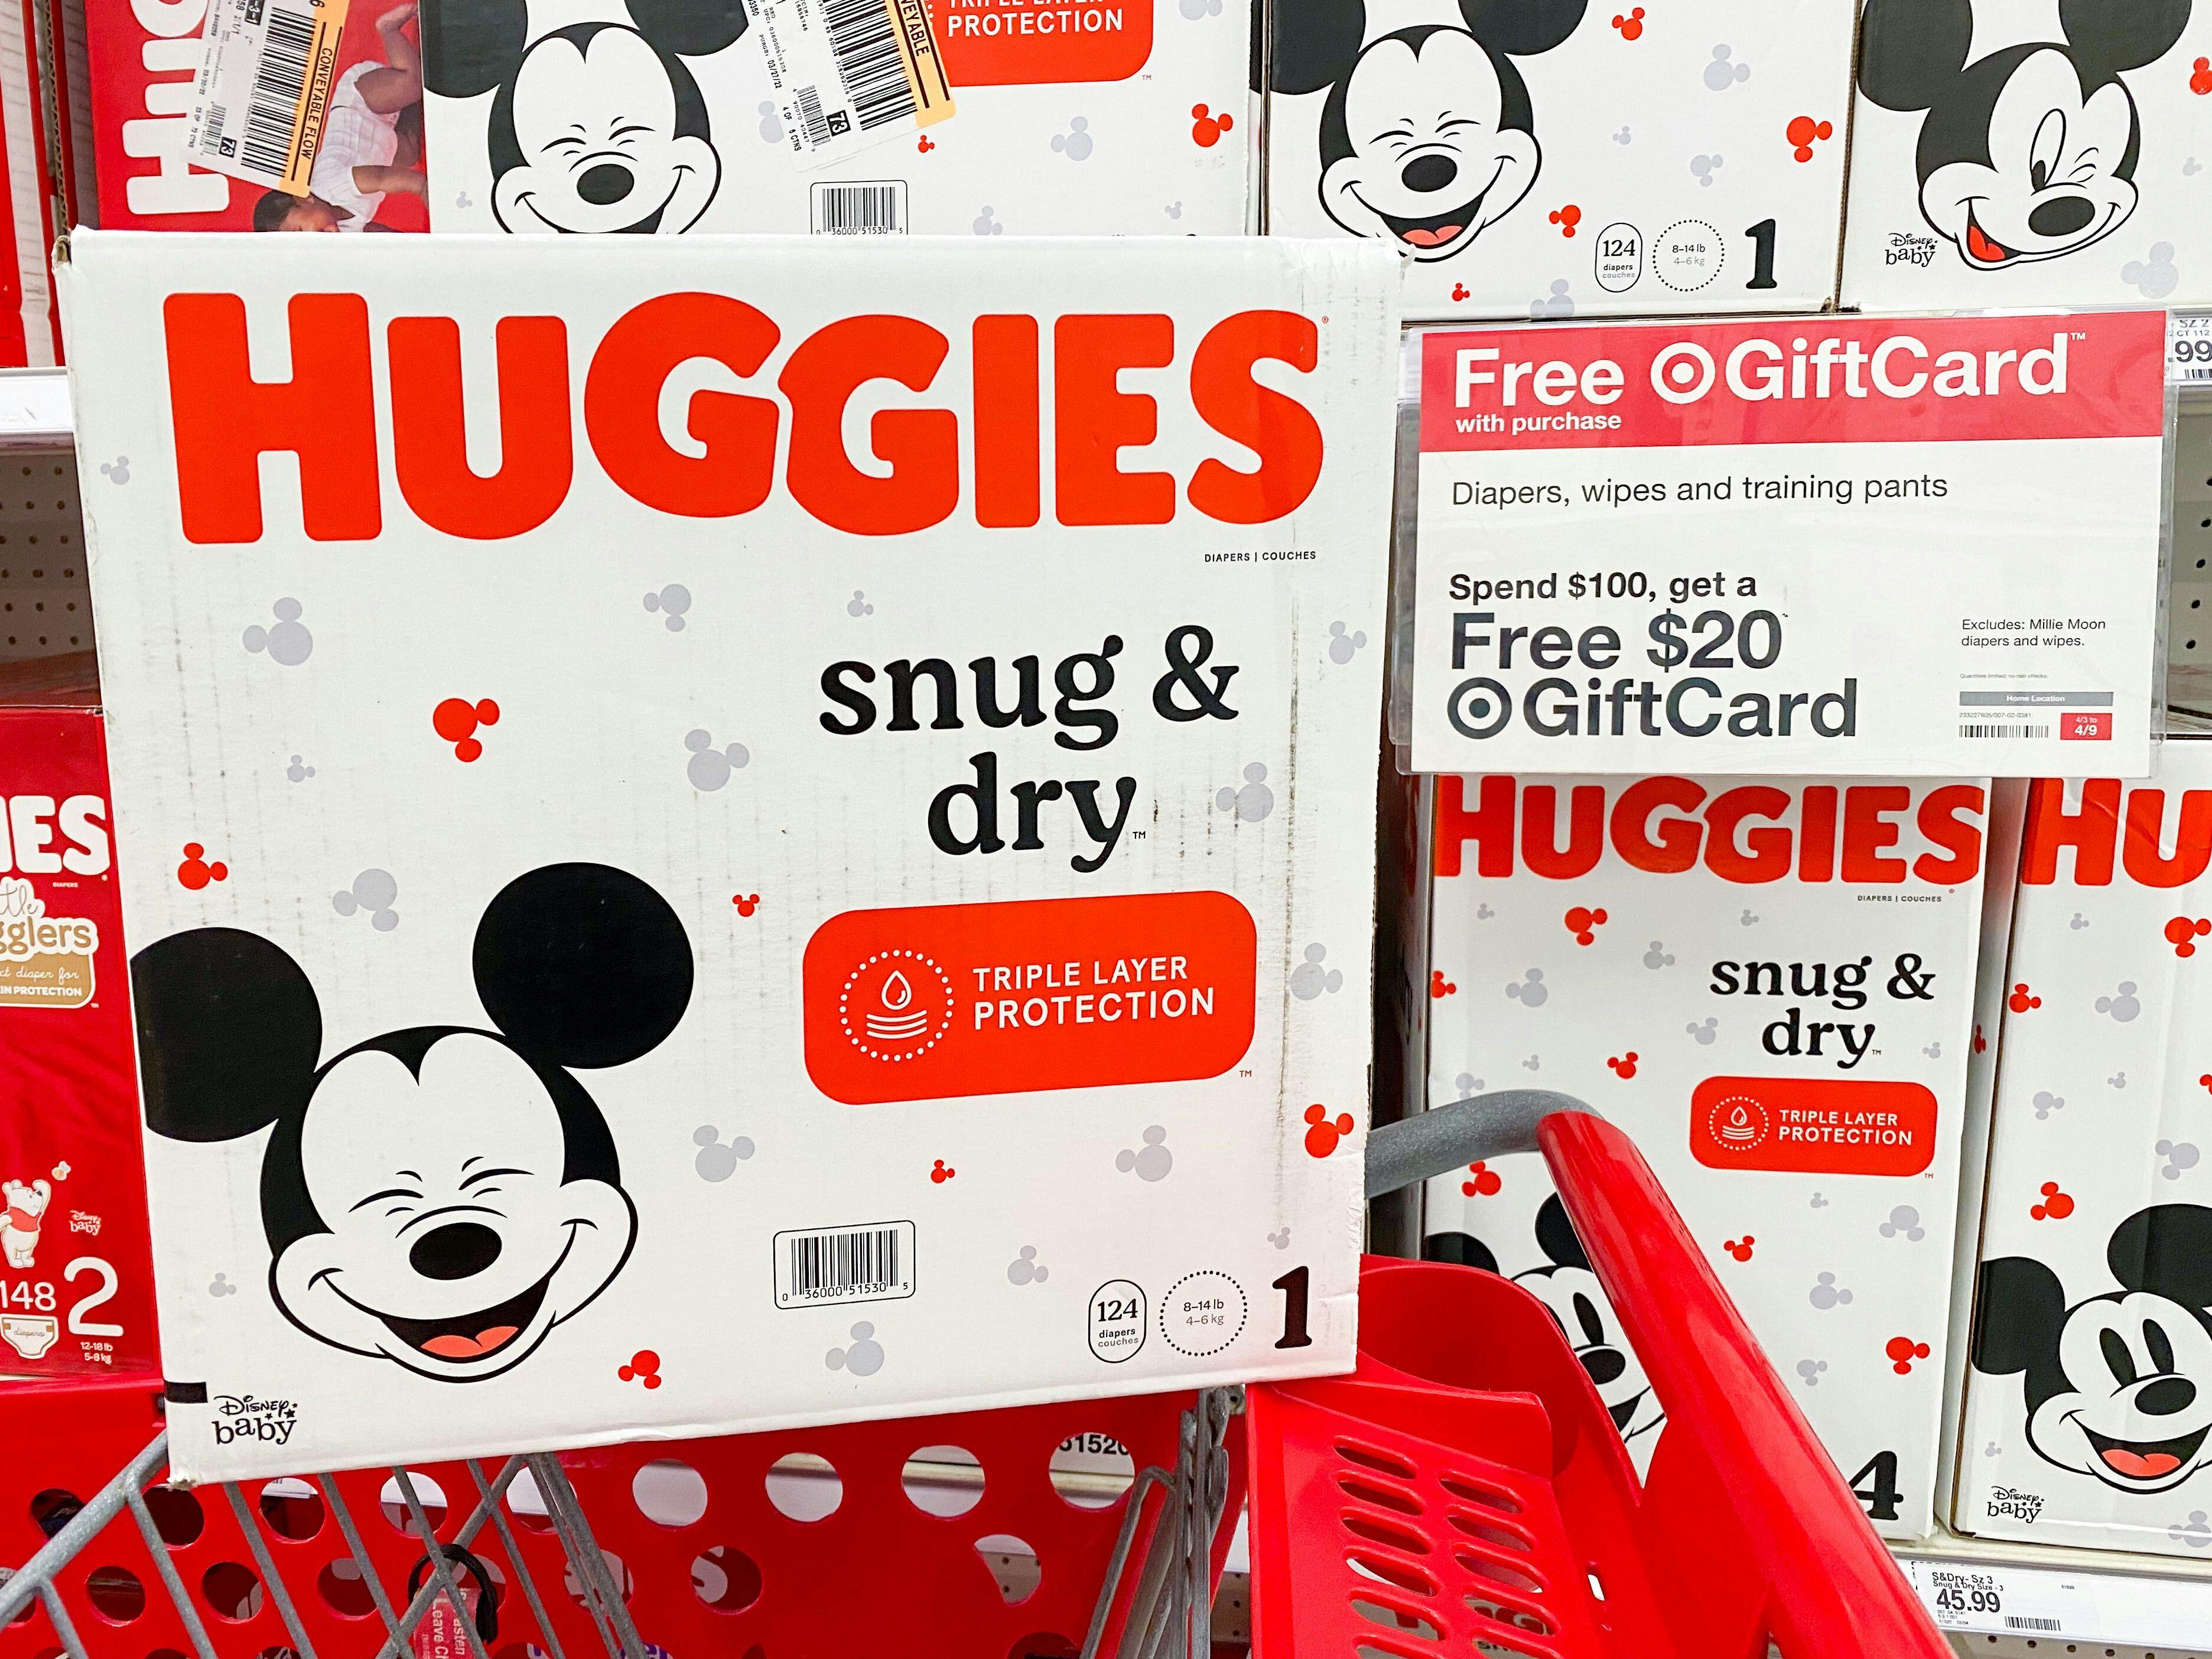 A box of Huggies Snug & Dry diapers sitting on a Target shopping cart in front of a sign advertising a Free $20 Target gift card when you spend $100 or more on diapers, wipes, and training pants.